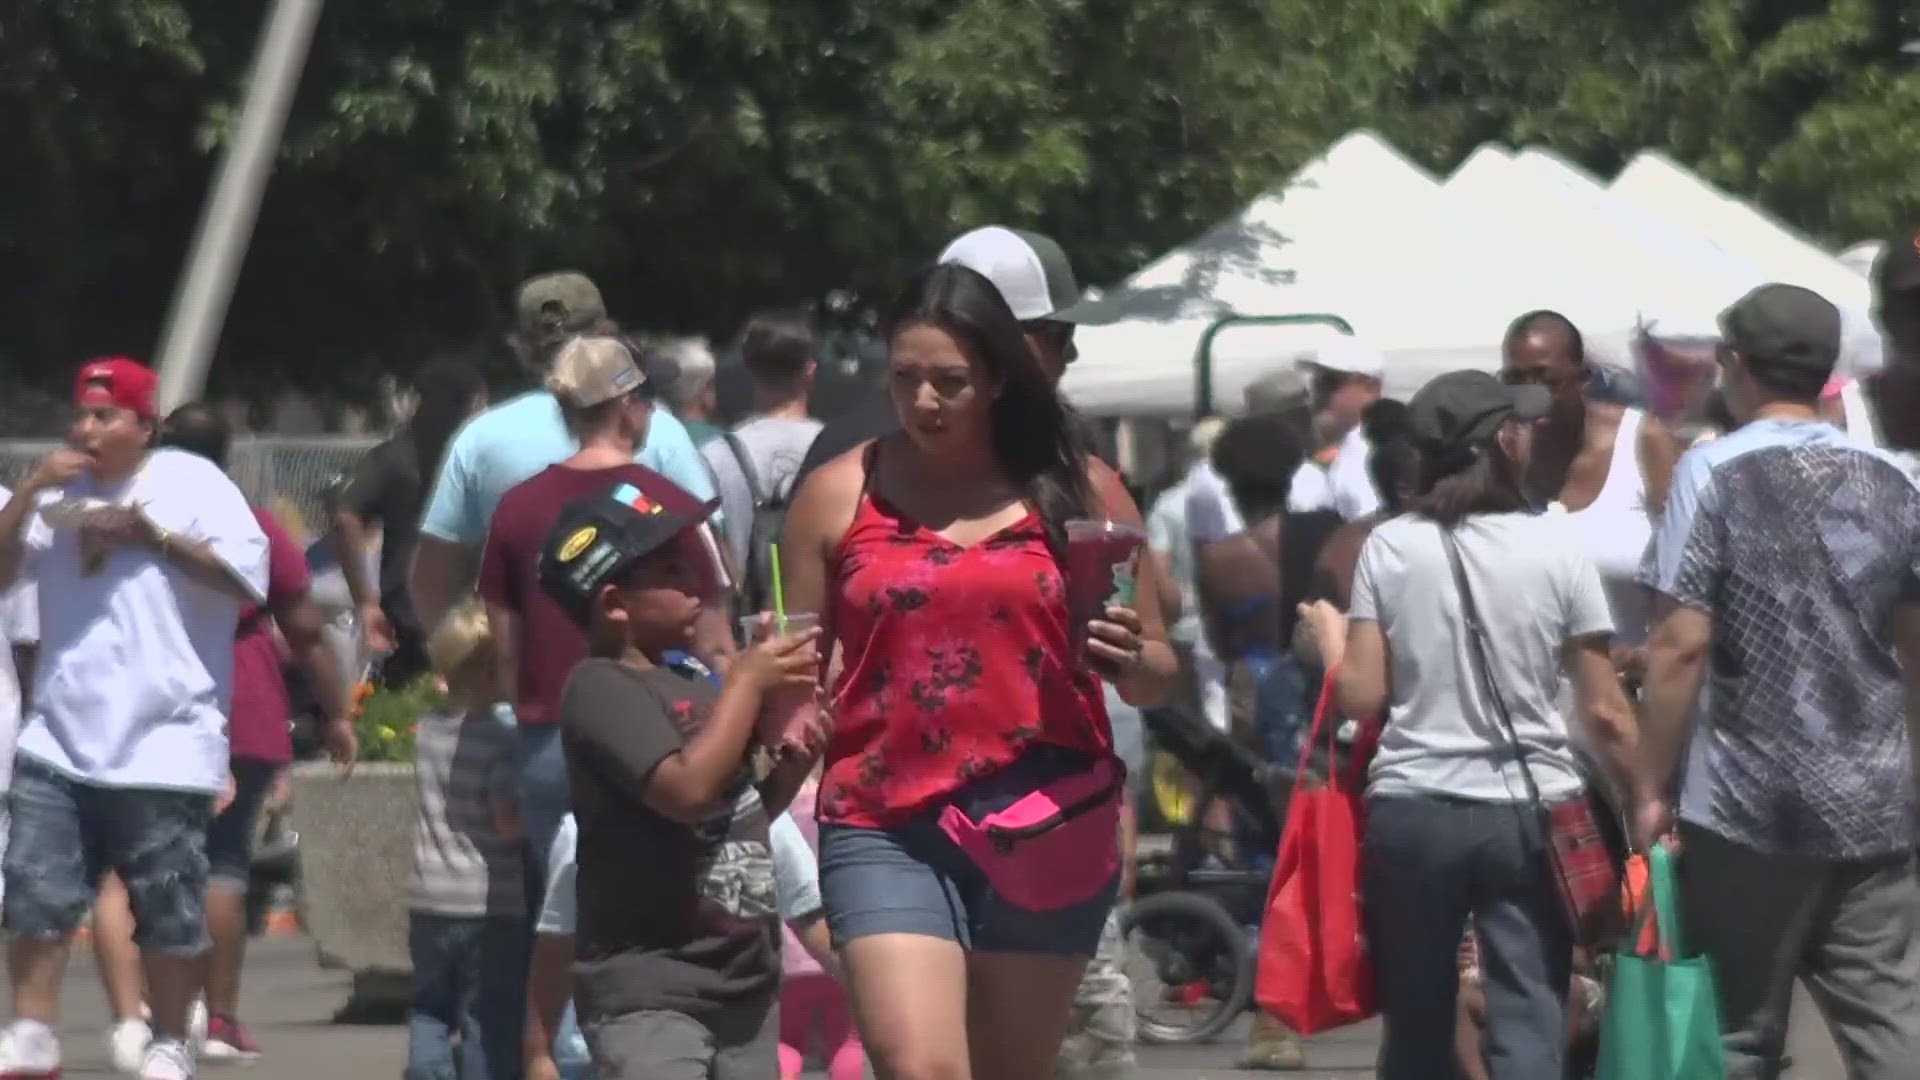 Though triple degree temperatures hit this weekend, Stockton was bustling with people attending the Soul Food Festival, Garlic Festival and Obon Japanese Festival.